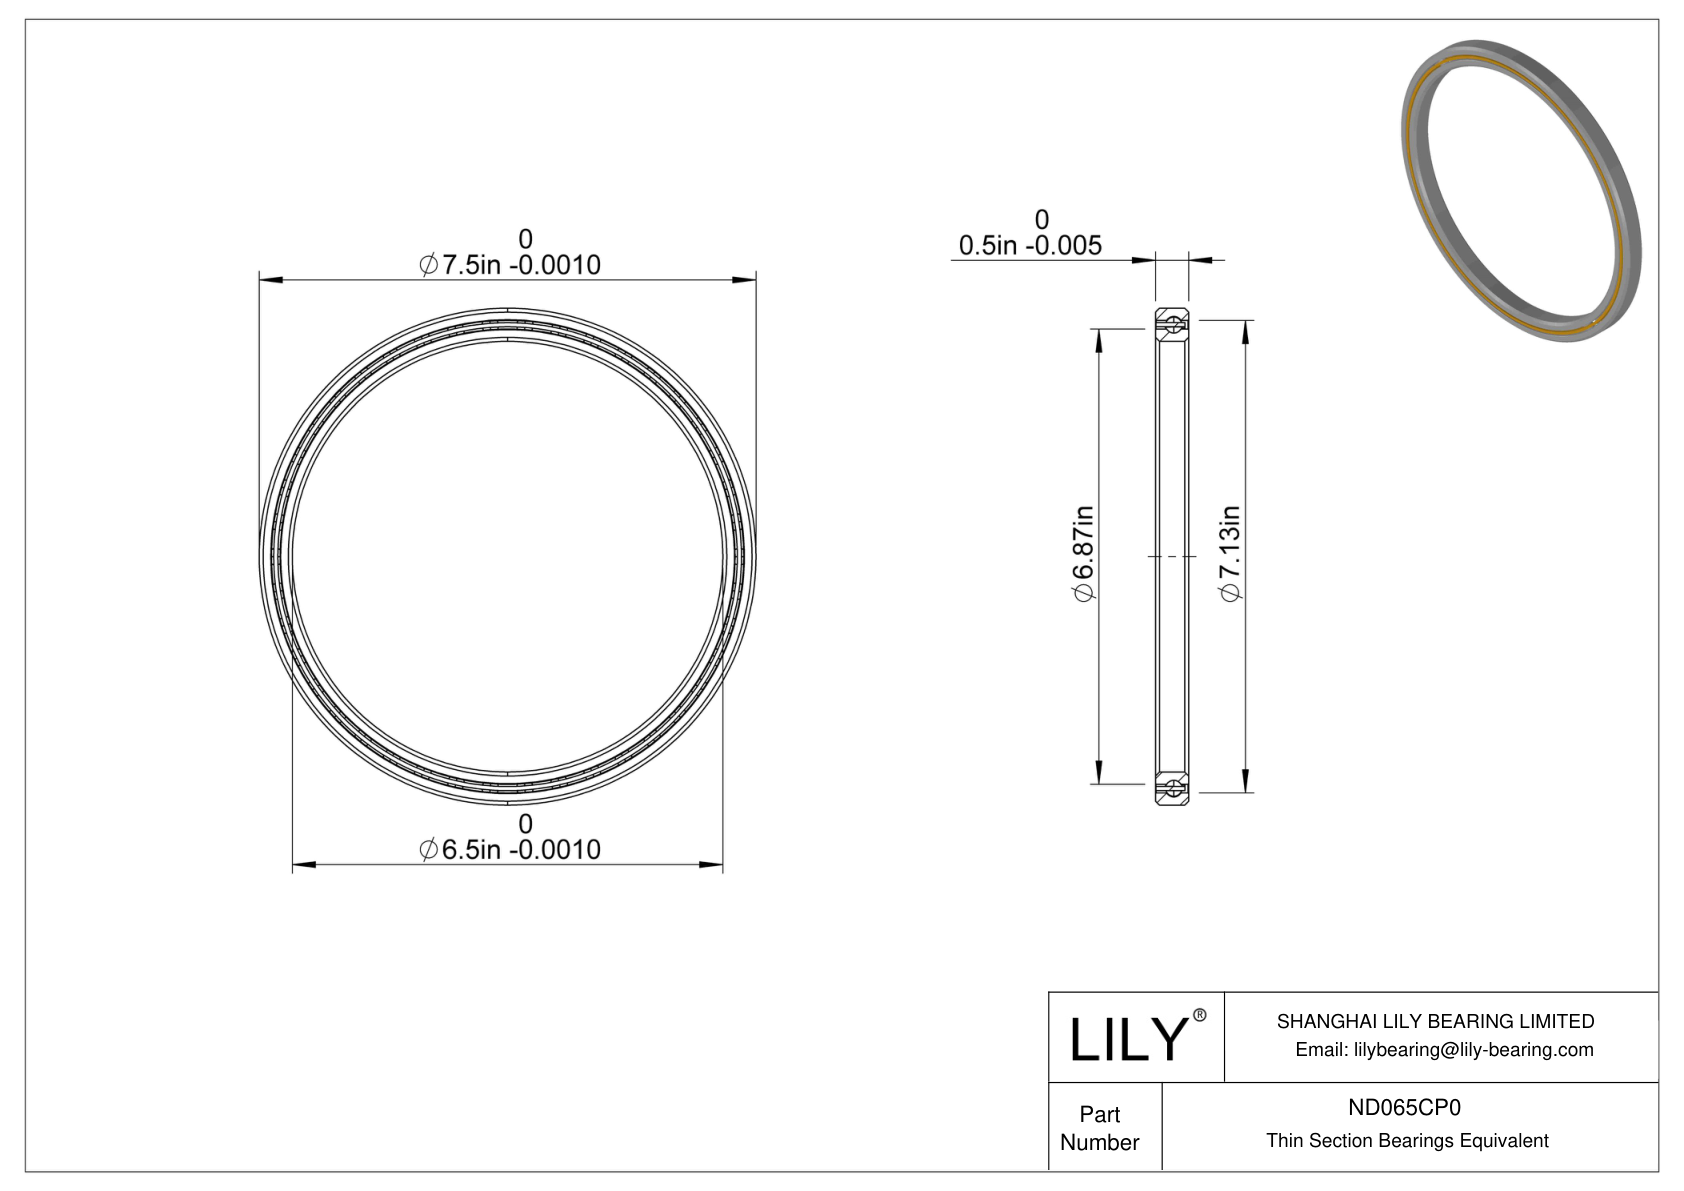 ND065CP0 Constant Section (CS) Bearings cad drawing